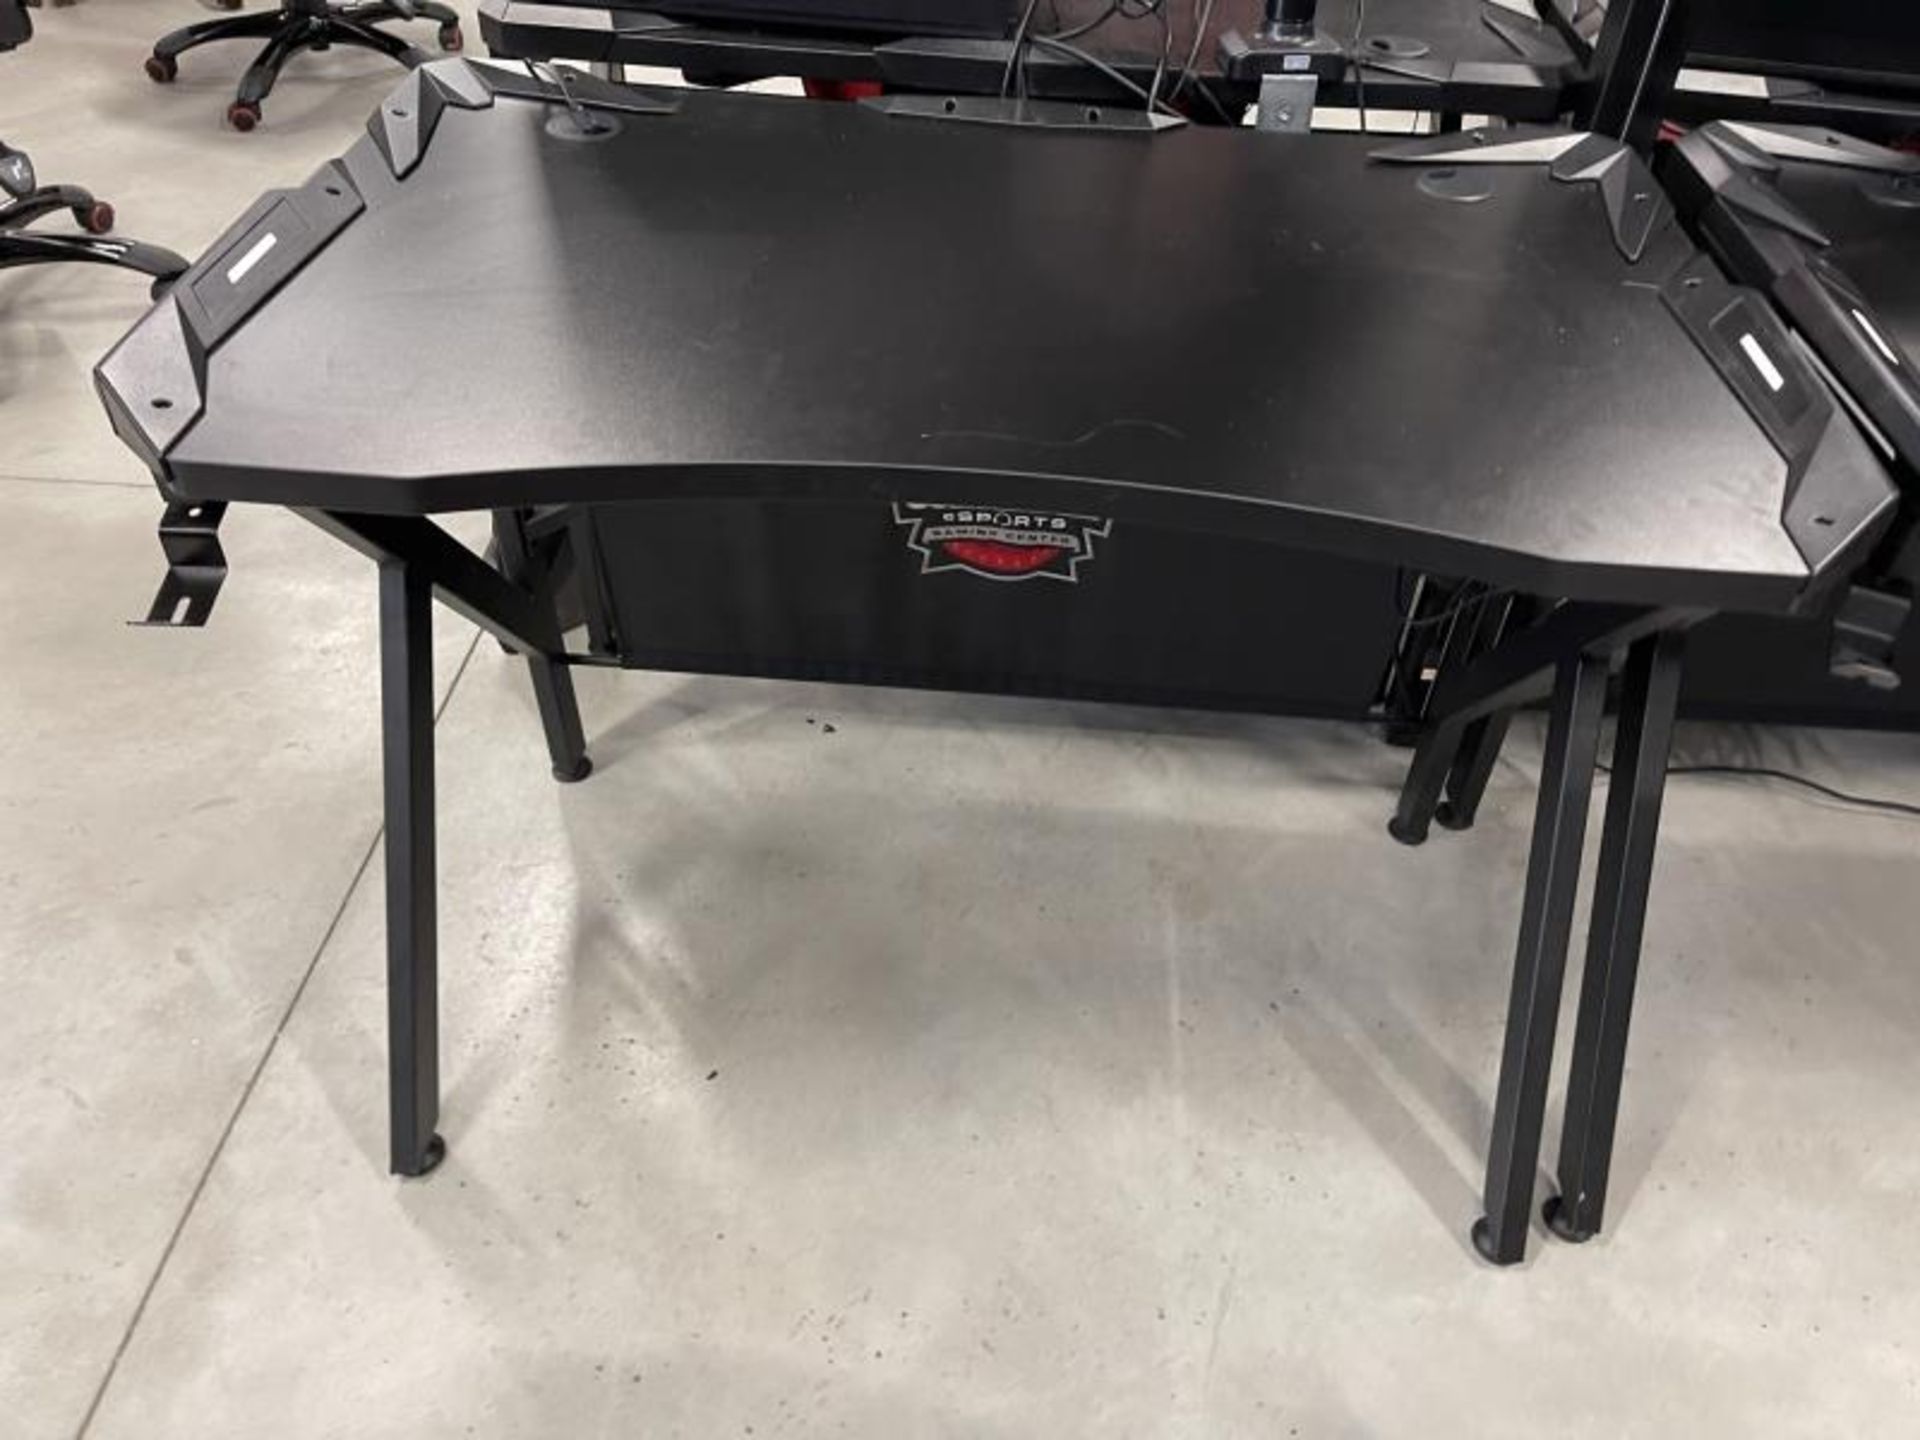 Gaming Desk 40" x 24" w/ Contender Red & Black Gaming Chair - Image 2 of 3